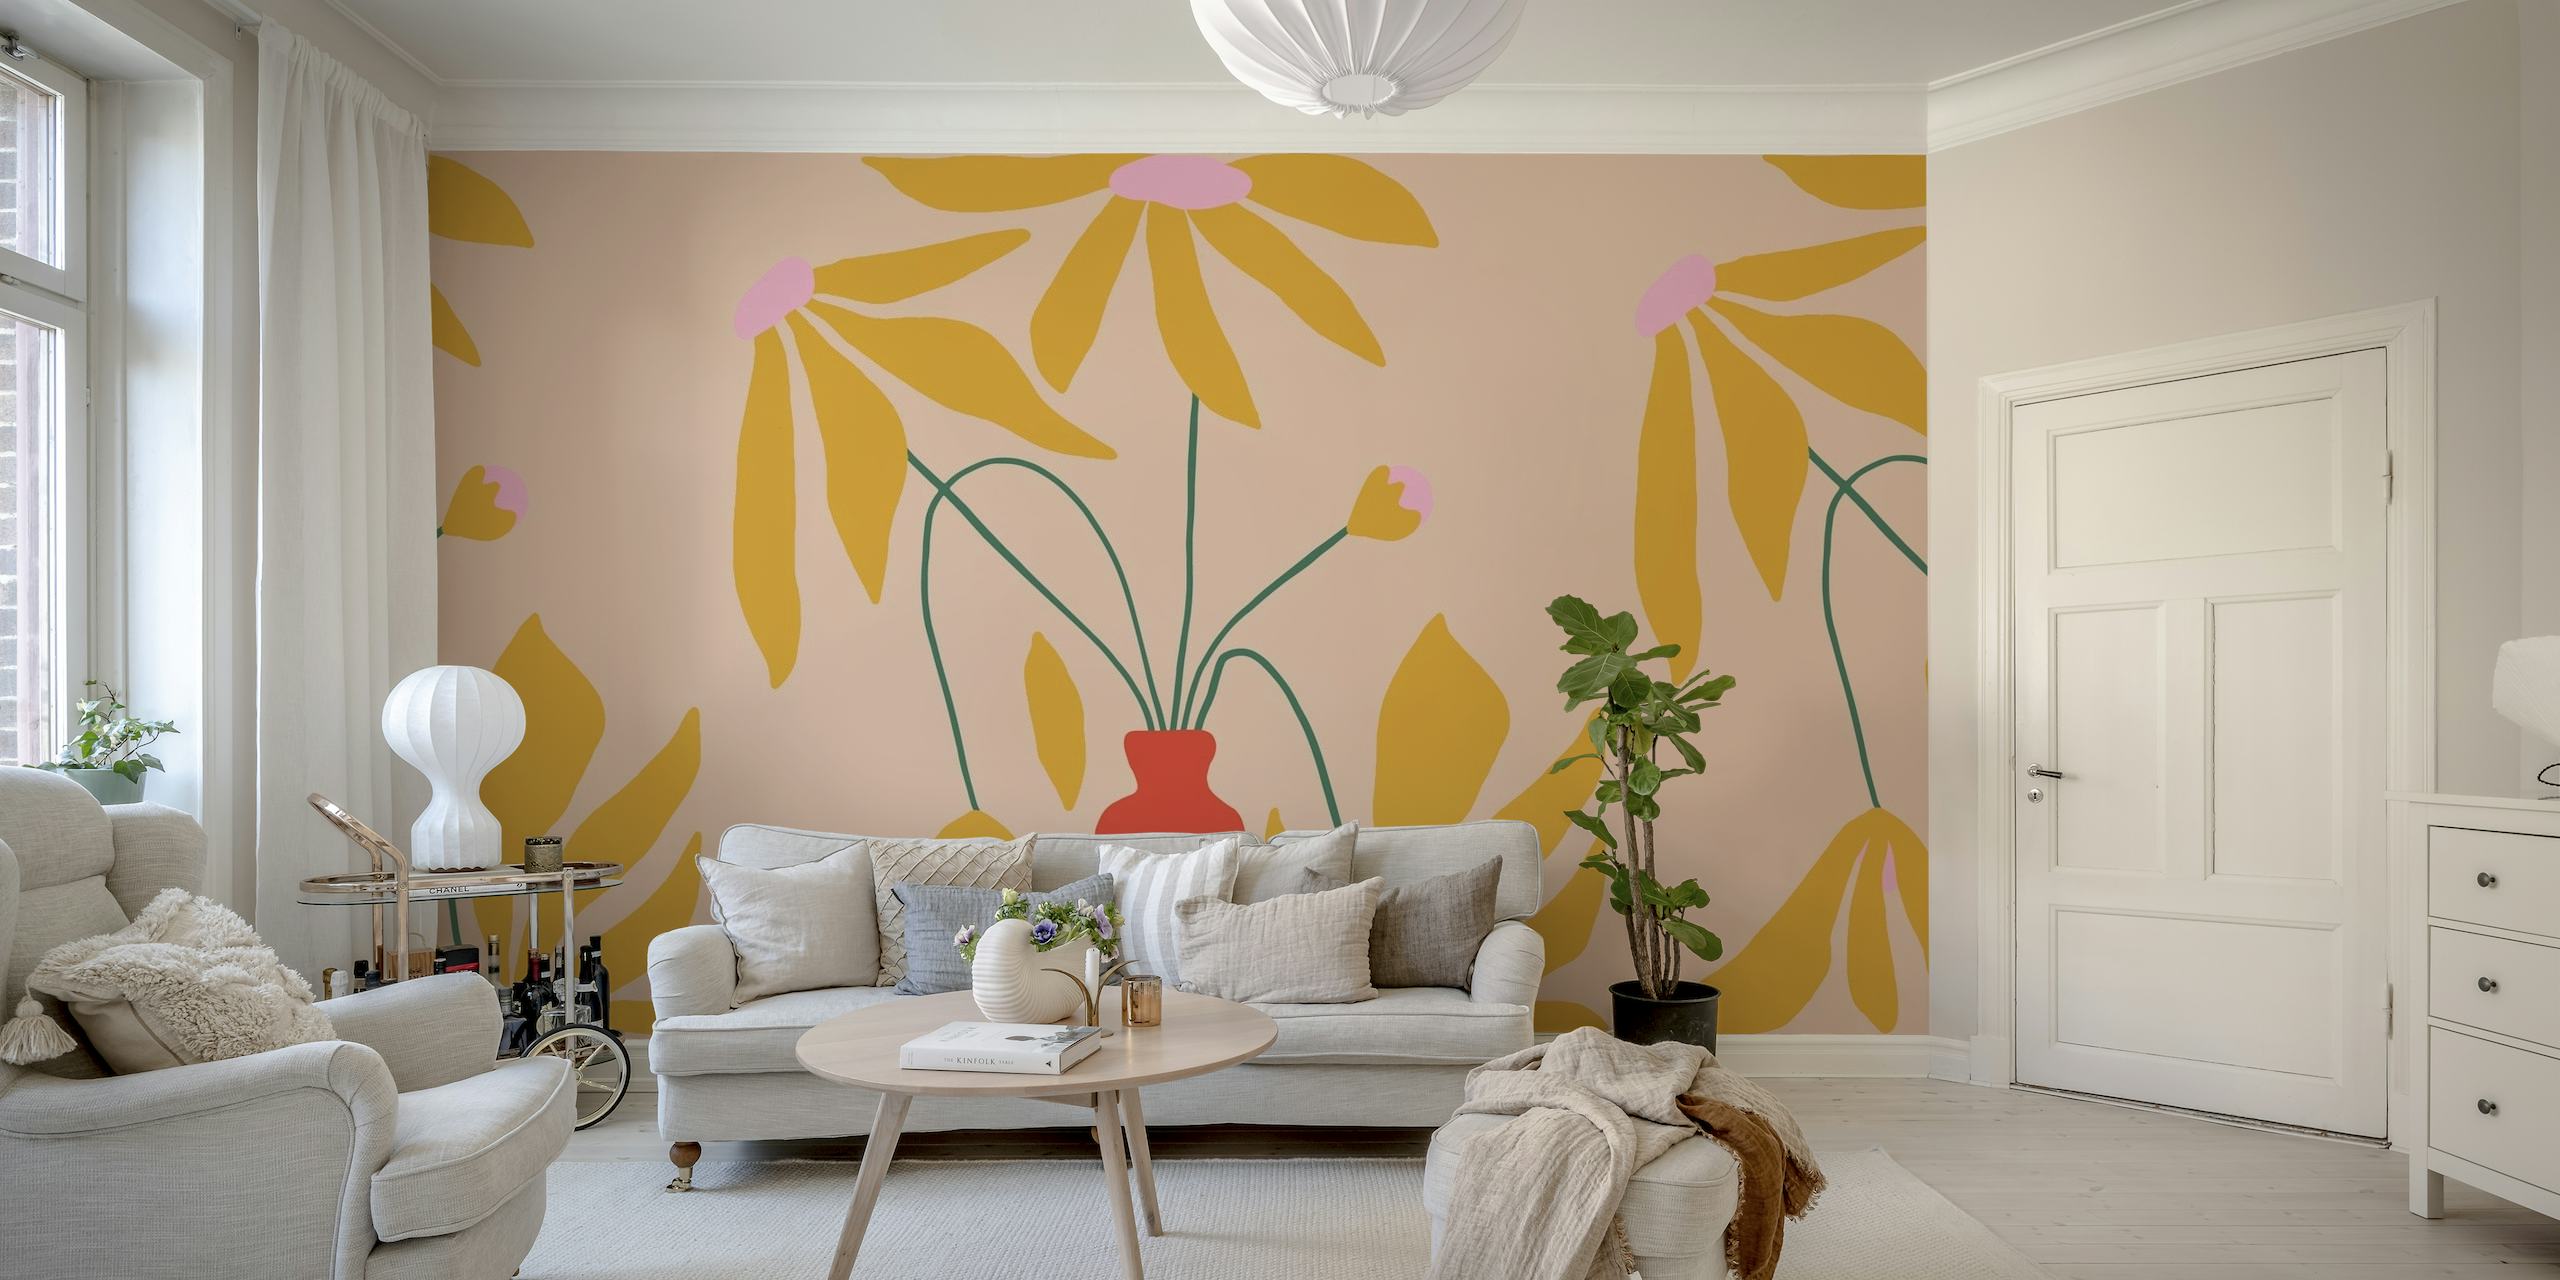 Warm Mid Century Floral wall mural with mustard and terracotta florals on a blush background